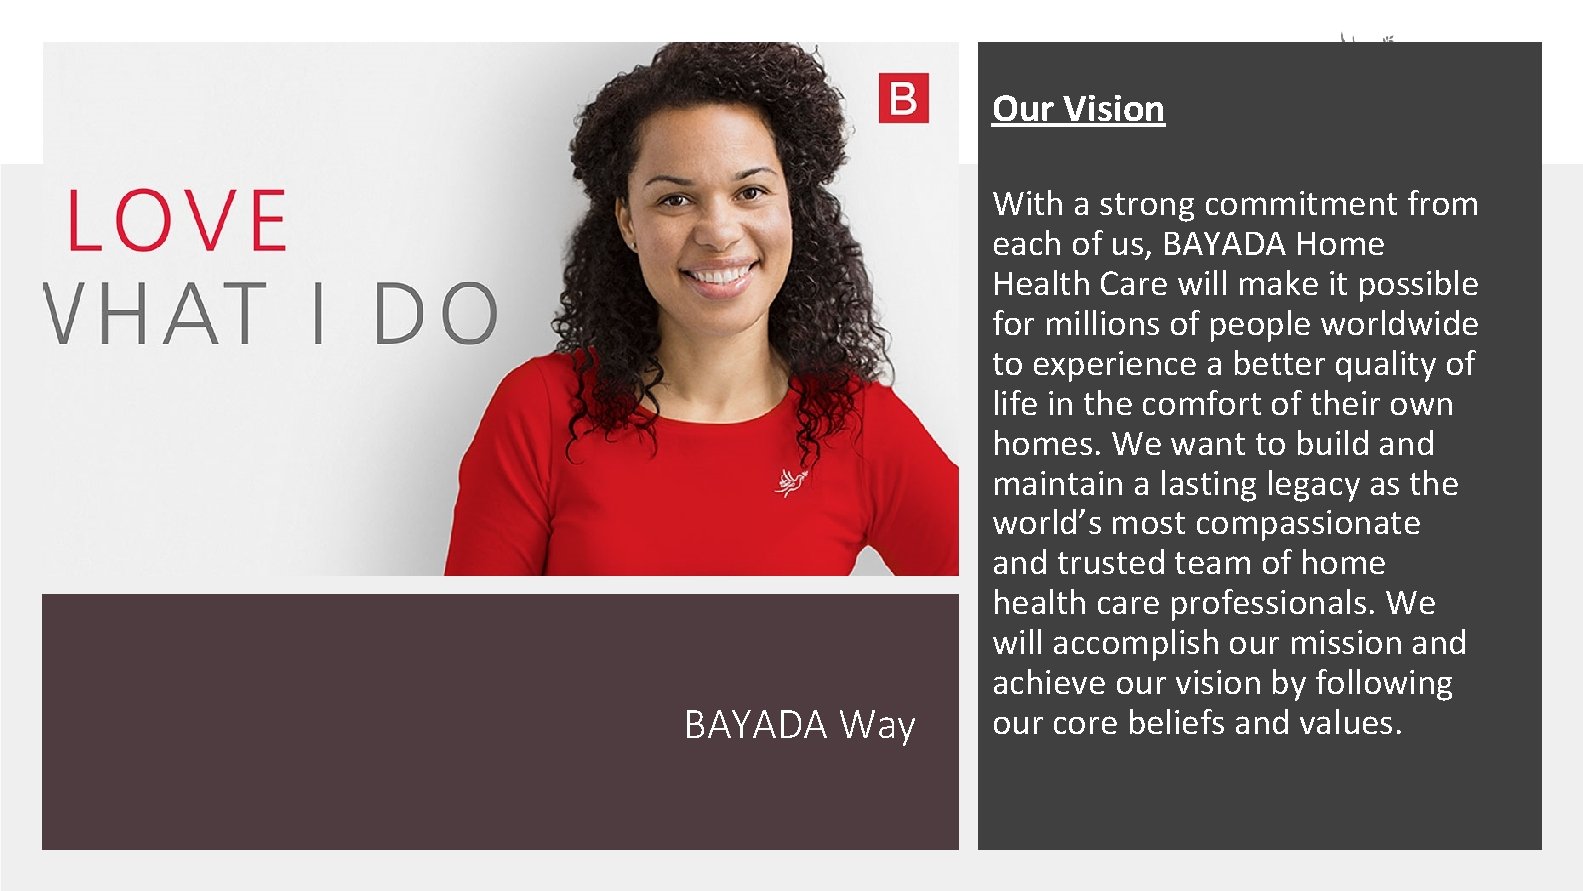 Our Vision BAYADA Way With a strong commitment from each of us, BAYADA Home